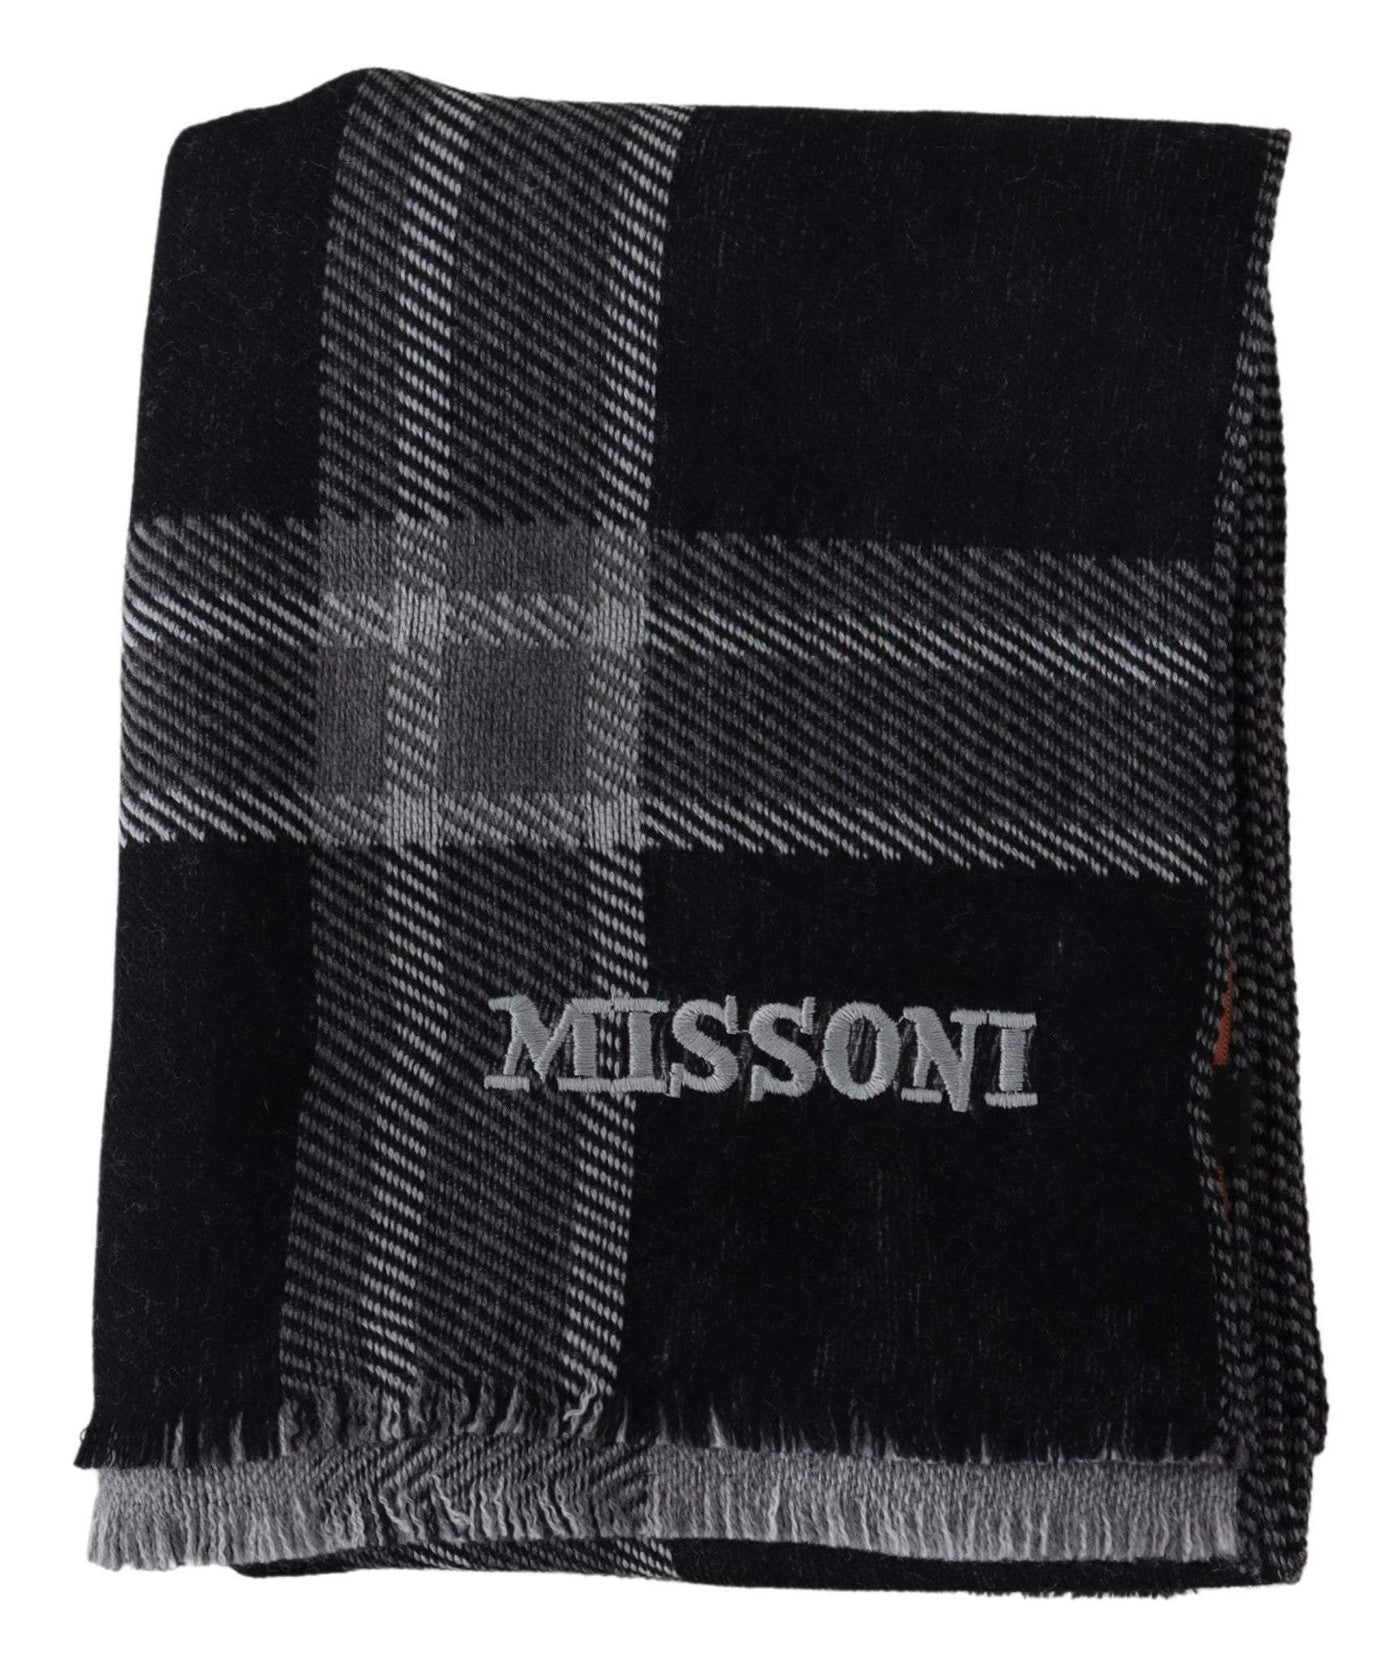 Missoni Black Plaid Wool Unisex Neck Wrap Scarf #men, Accessories - New Arrivals, Black, feed-agegroup-adult, feed-color-Black, feed-gender-male, Missoni, Scarves - Men - Accessories at SEYMAYKA